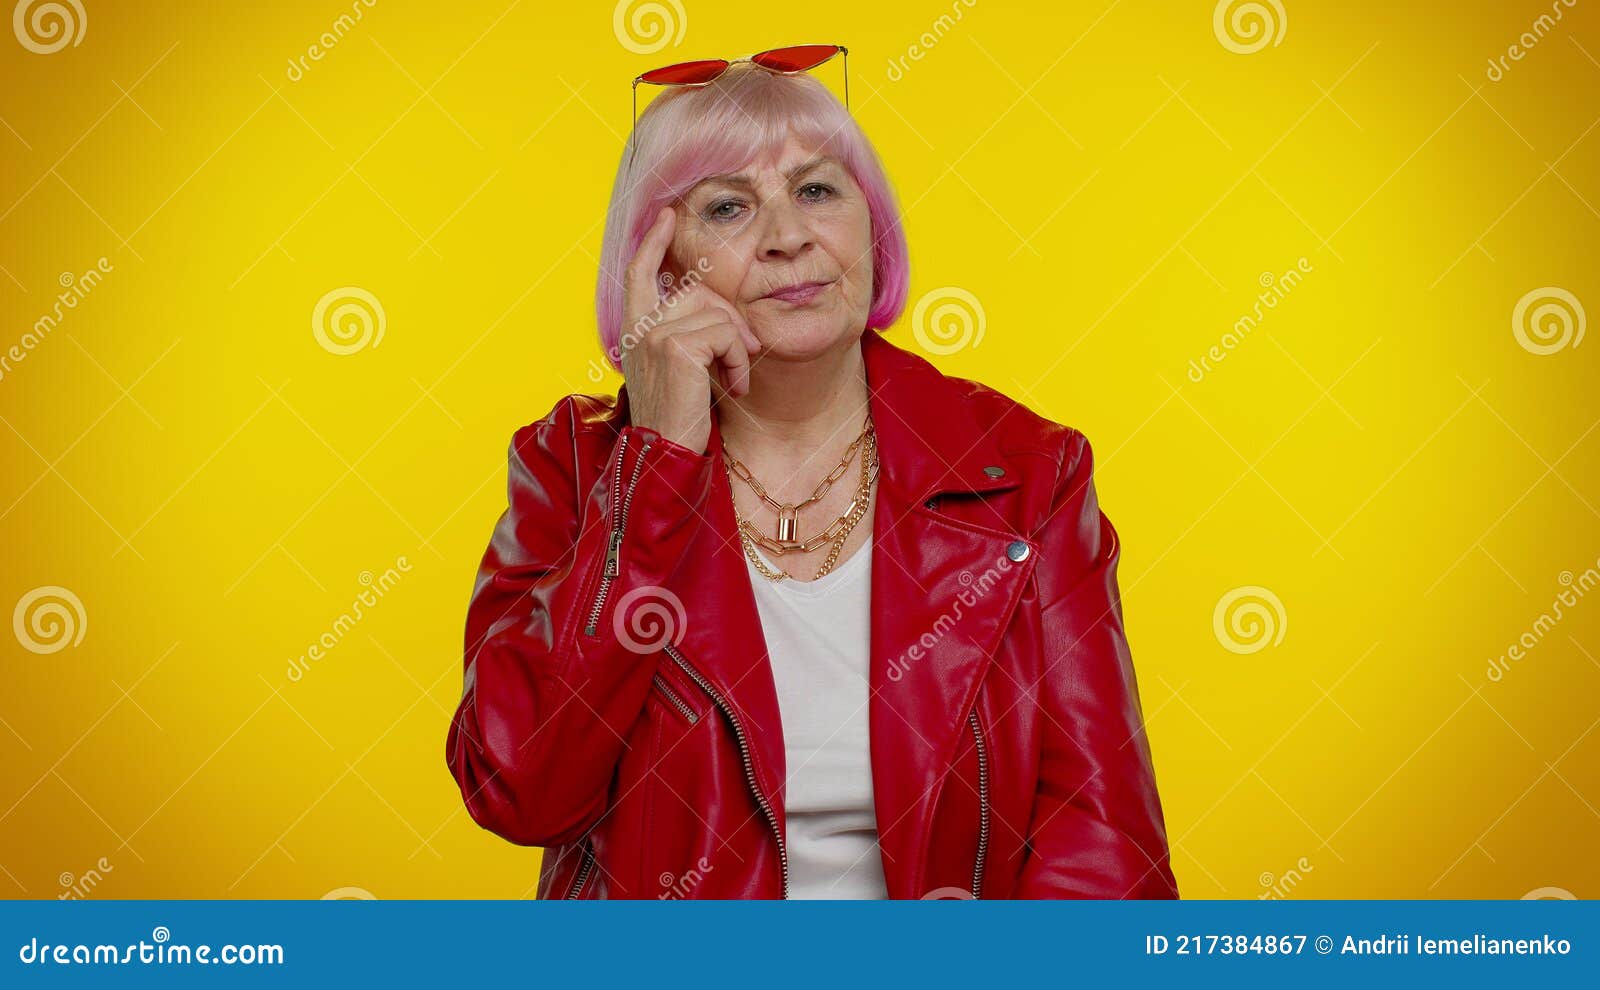 Thoughtful Clever Senior Old Grandma Woman Rubbing Her Chin Pondering A Solution Doubting